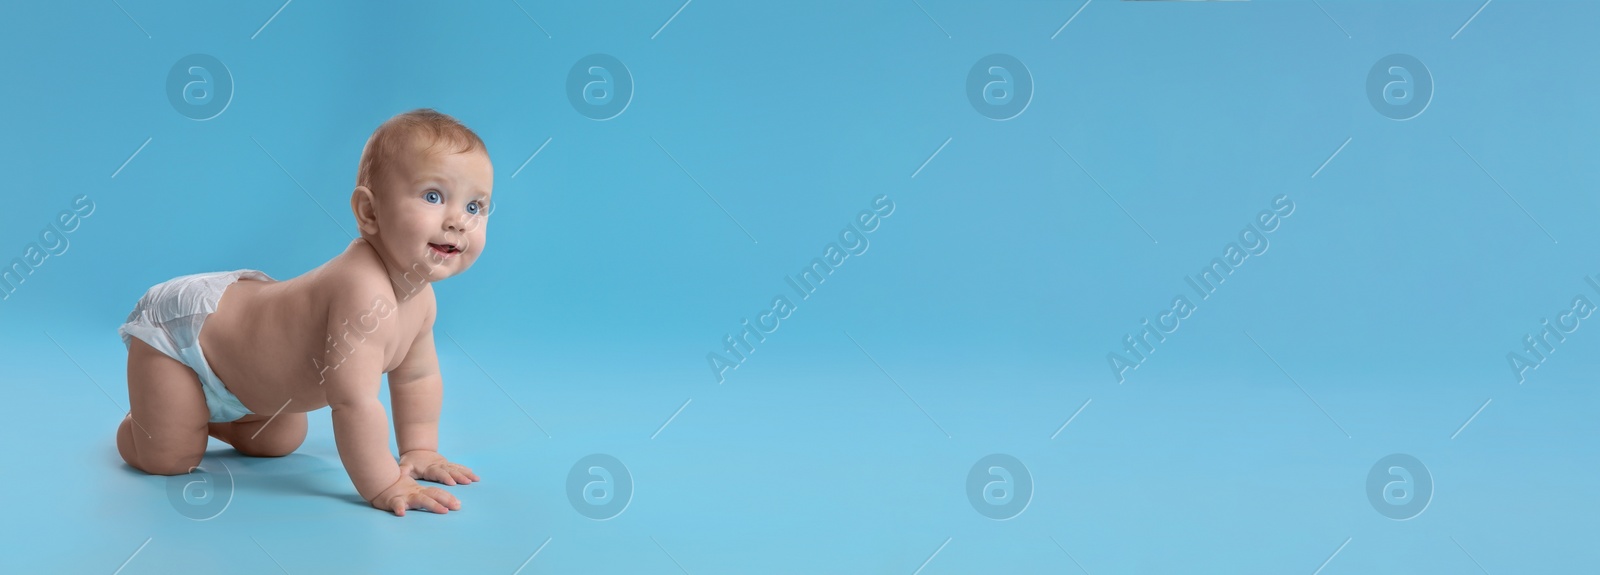 Image of Cute baby in diaper crawling on light blue background, space for text. Banner design